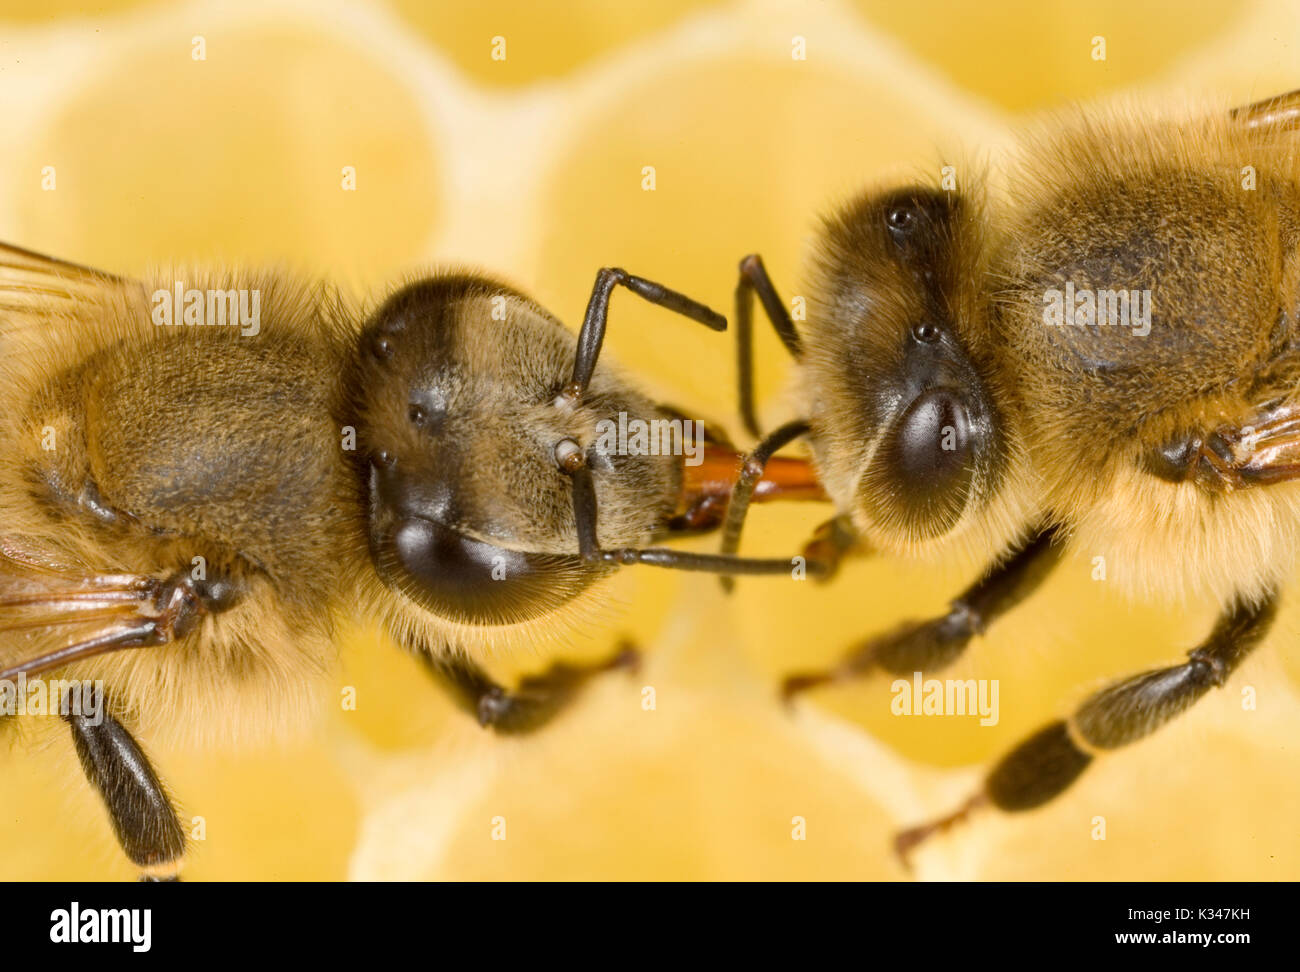 Working-bees: working-bee feeding another one, trunk to trunk. Trophallaxis, food exchange between insects of the hymenoptera order Stock Photo